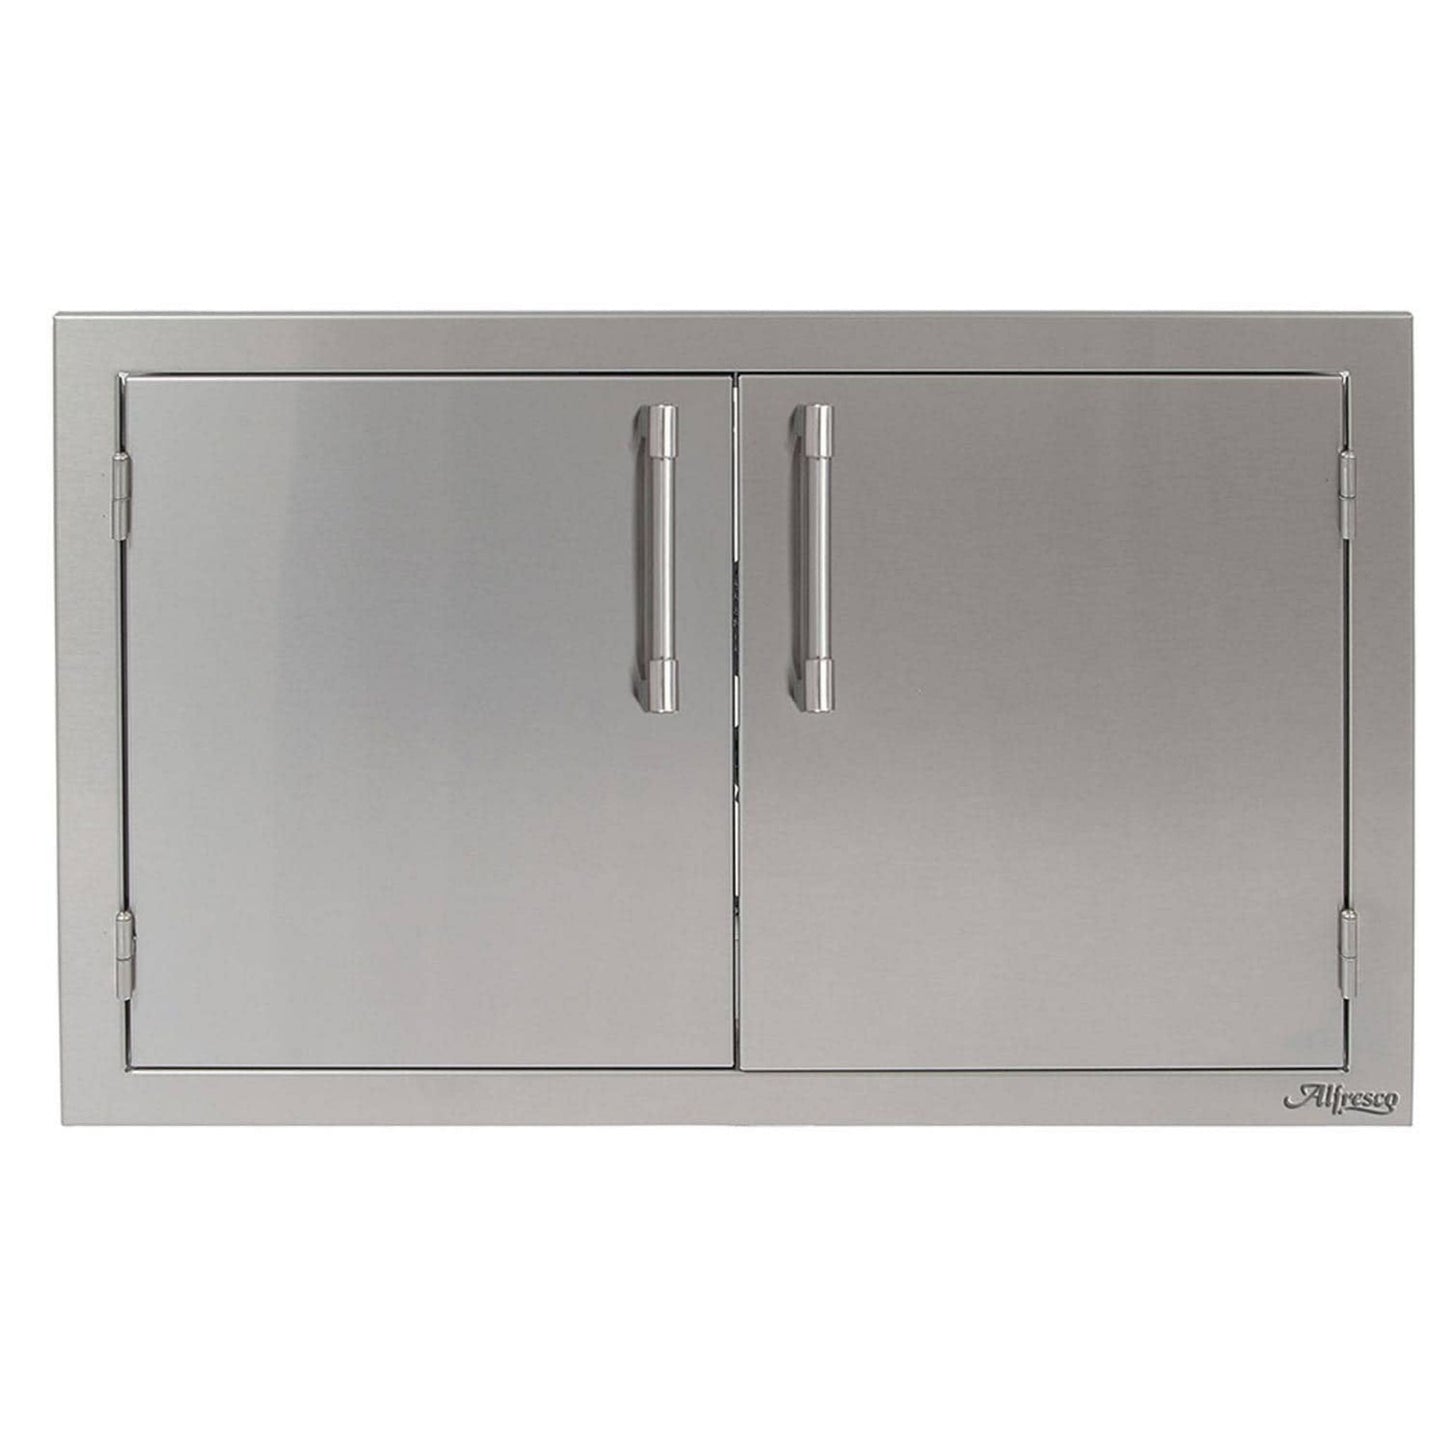 Alfresco 42" Signal White Gloss Stainless Steel Double Access Doors